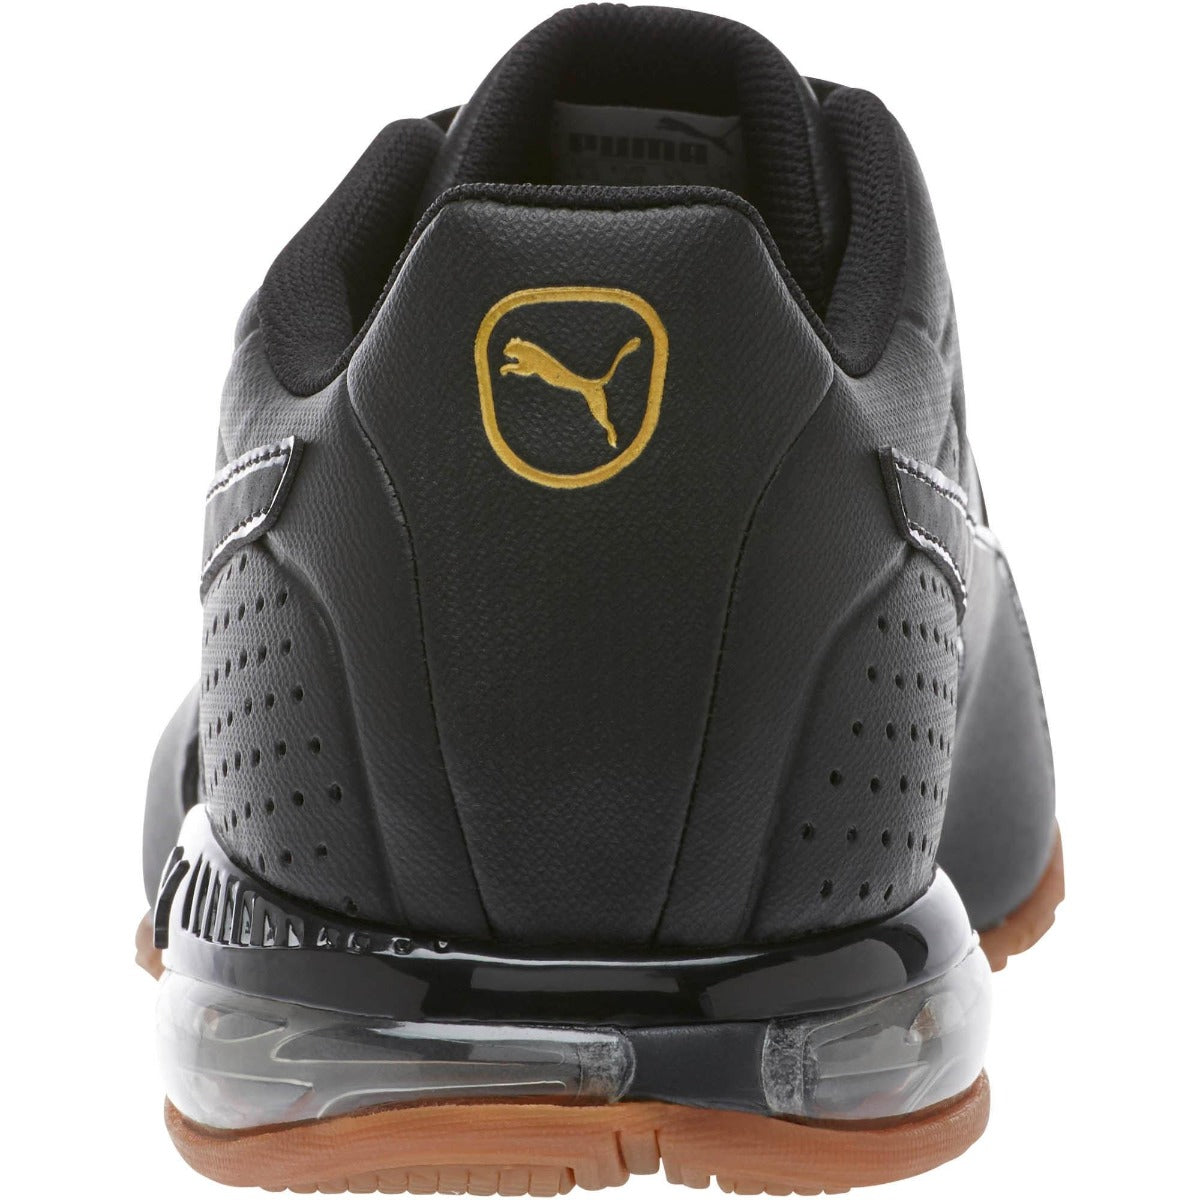 Puma Synthetic Cell Surin II FM Running shoes|Black